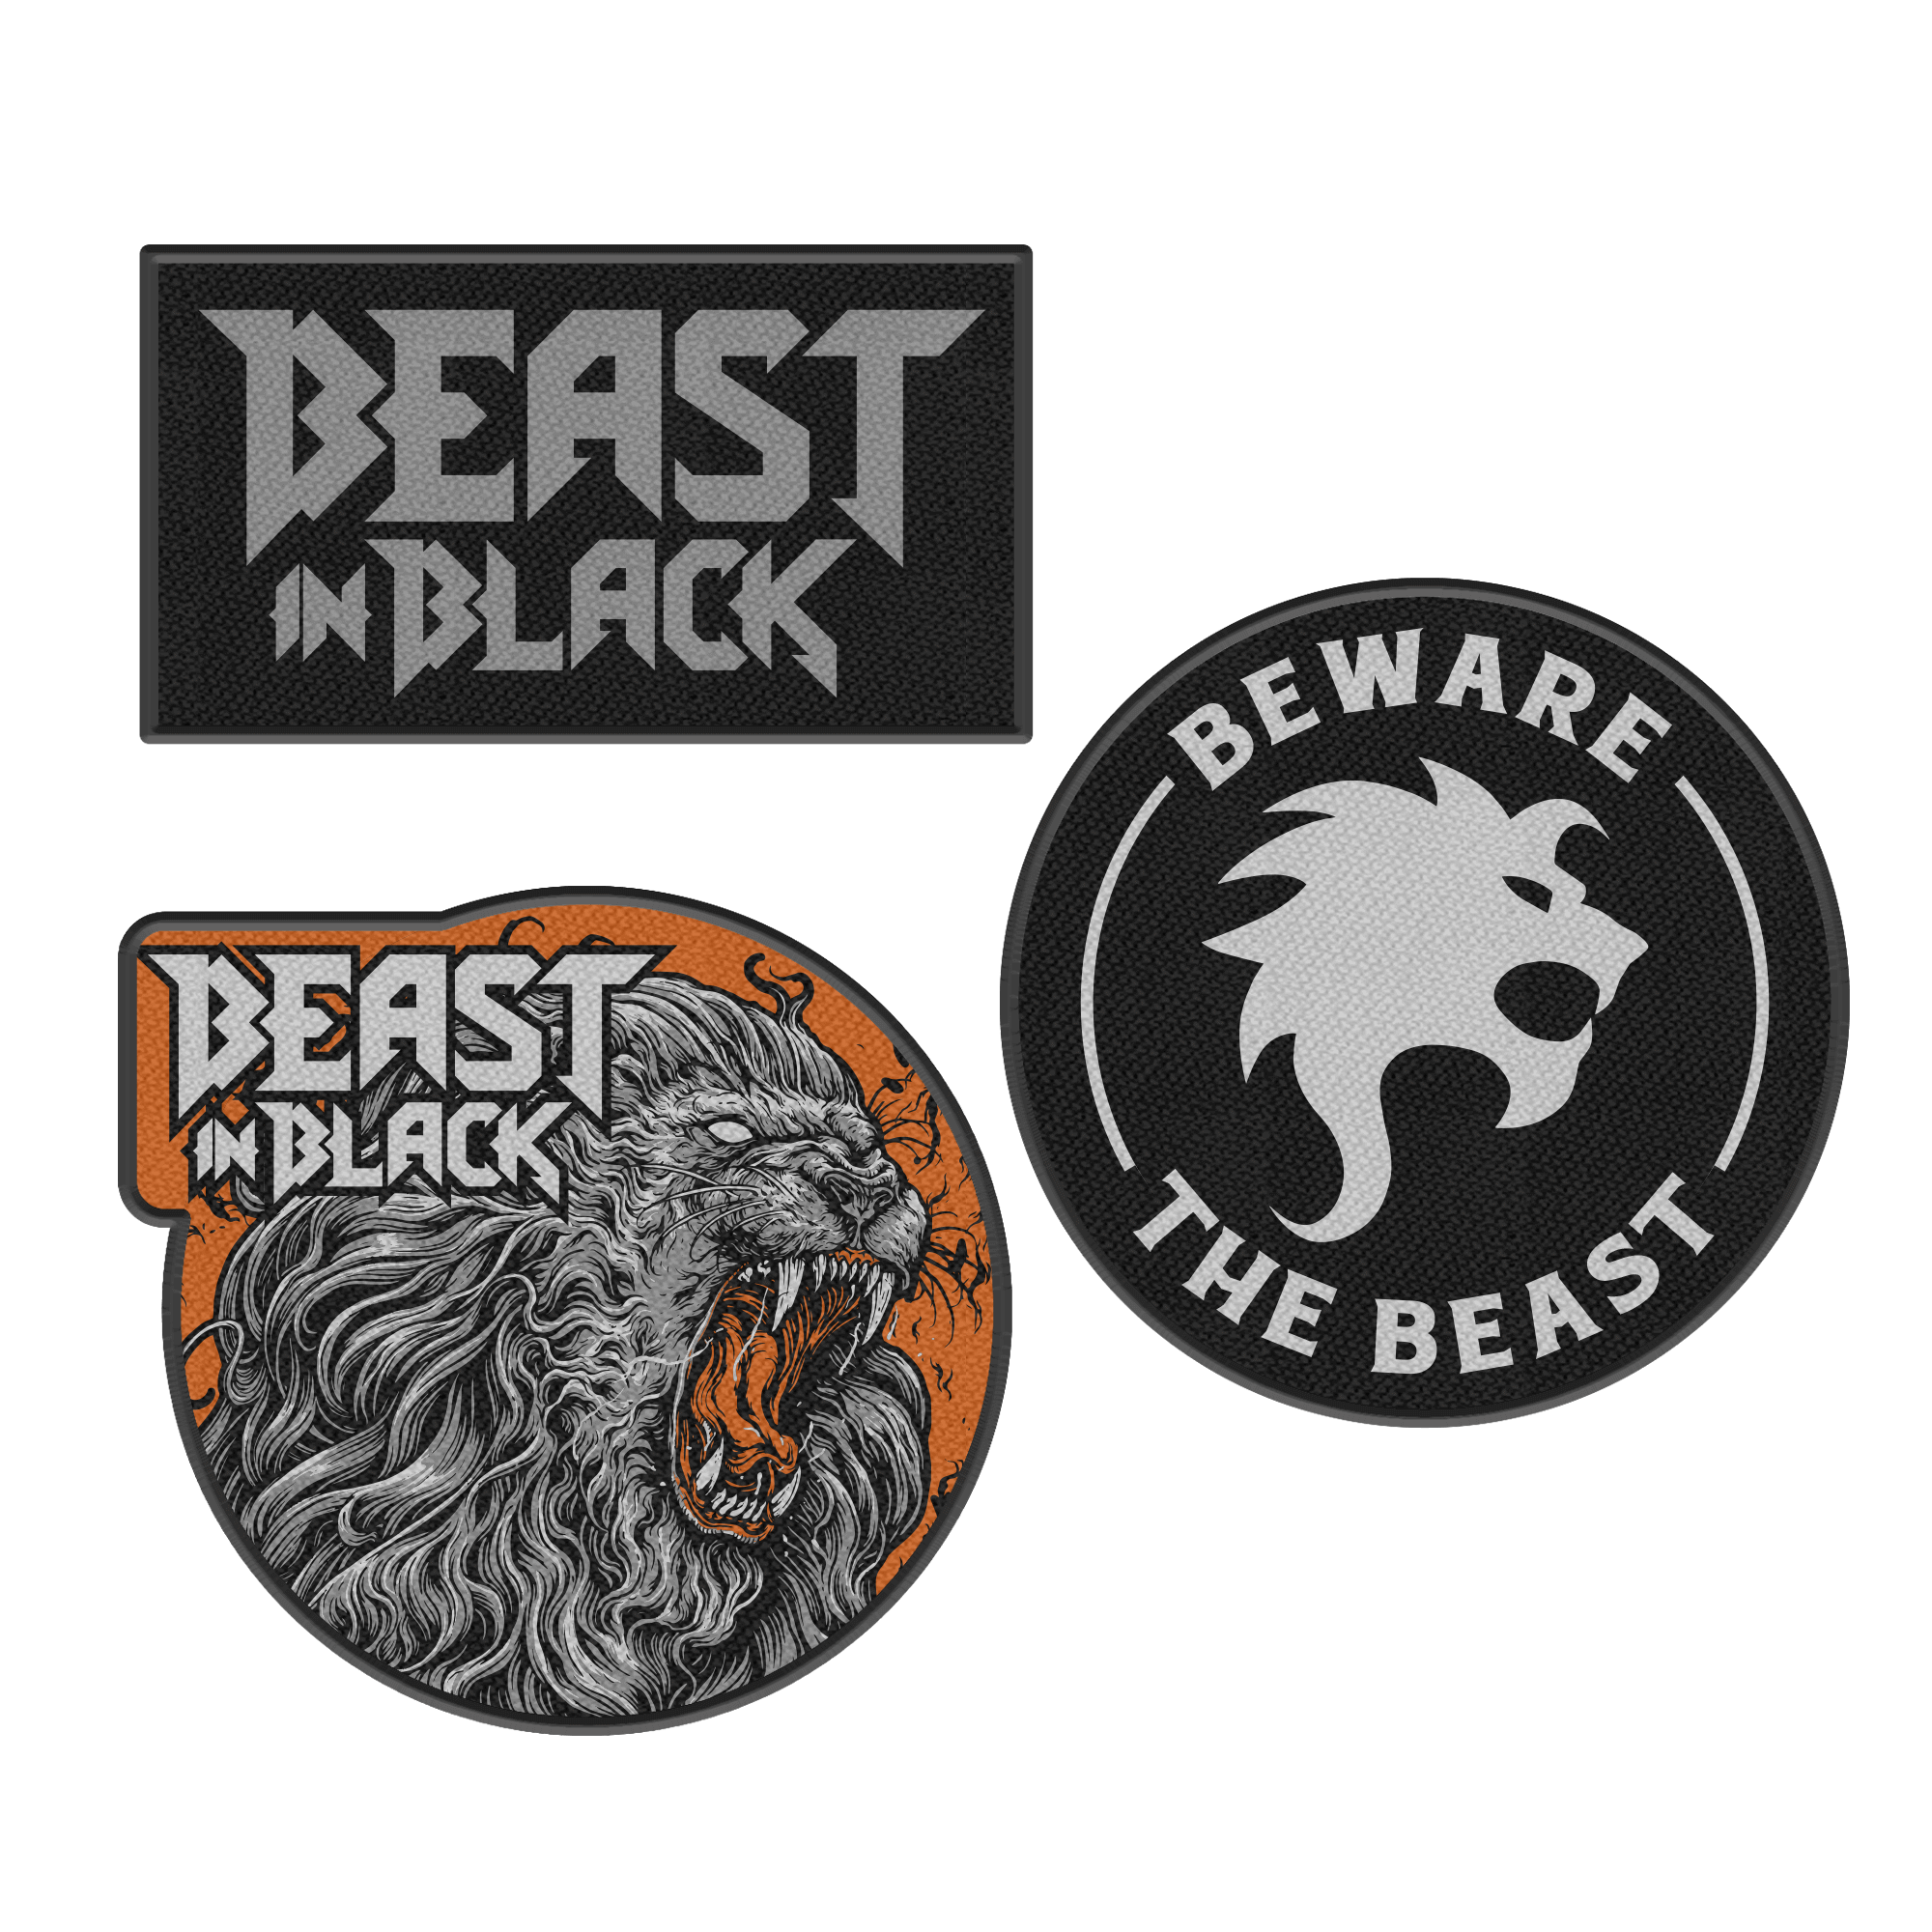 https://images.bravado.de/prod/product-assets/product-asset-data/beast-in-black/beast-in-black/products/505995/web/417870/image-thumb__417870__3000x3000_original/Beast-In-Black-Beast-Within-Patch-mehrfarbig-505995-417870.png